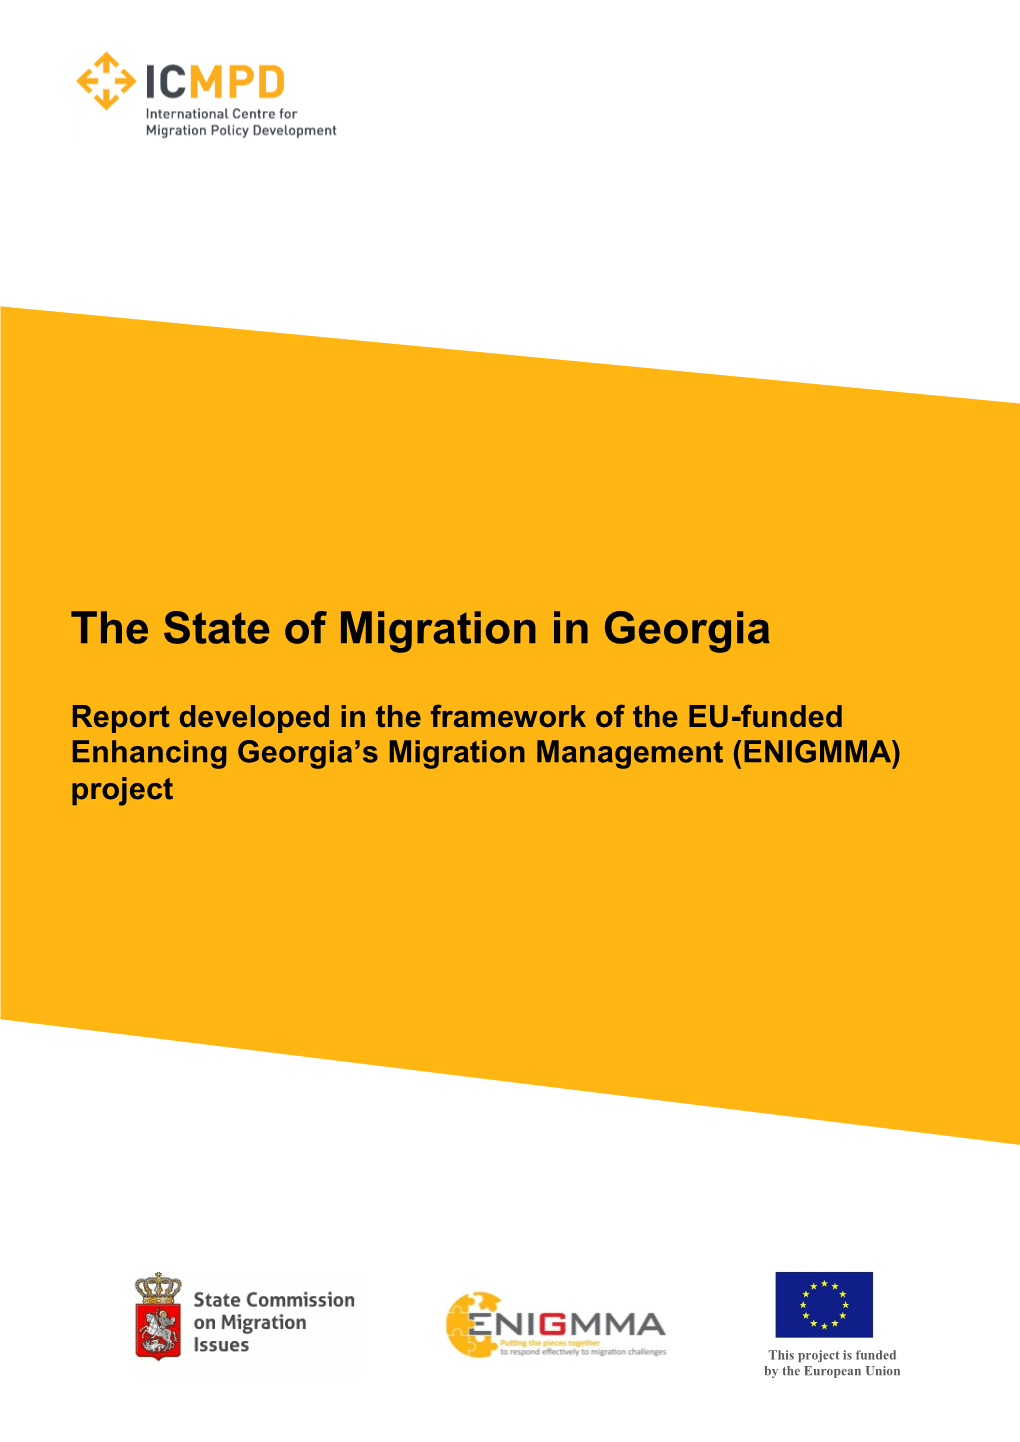 The State of Migration in Georgia